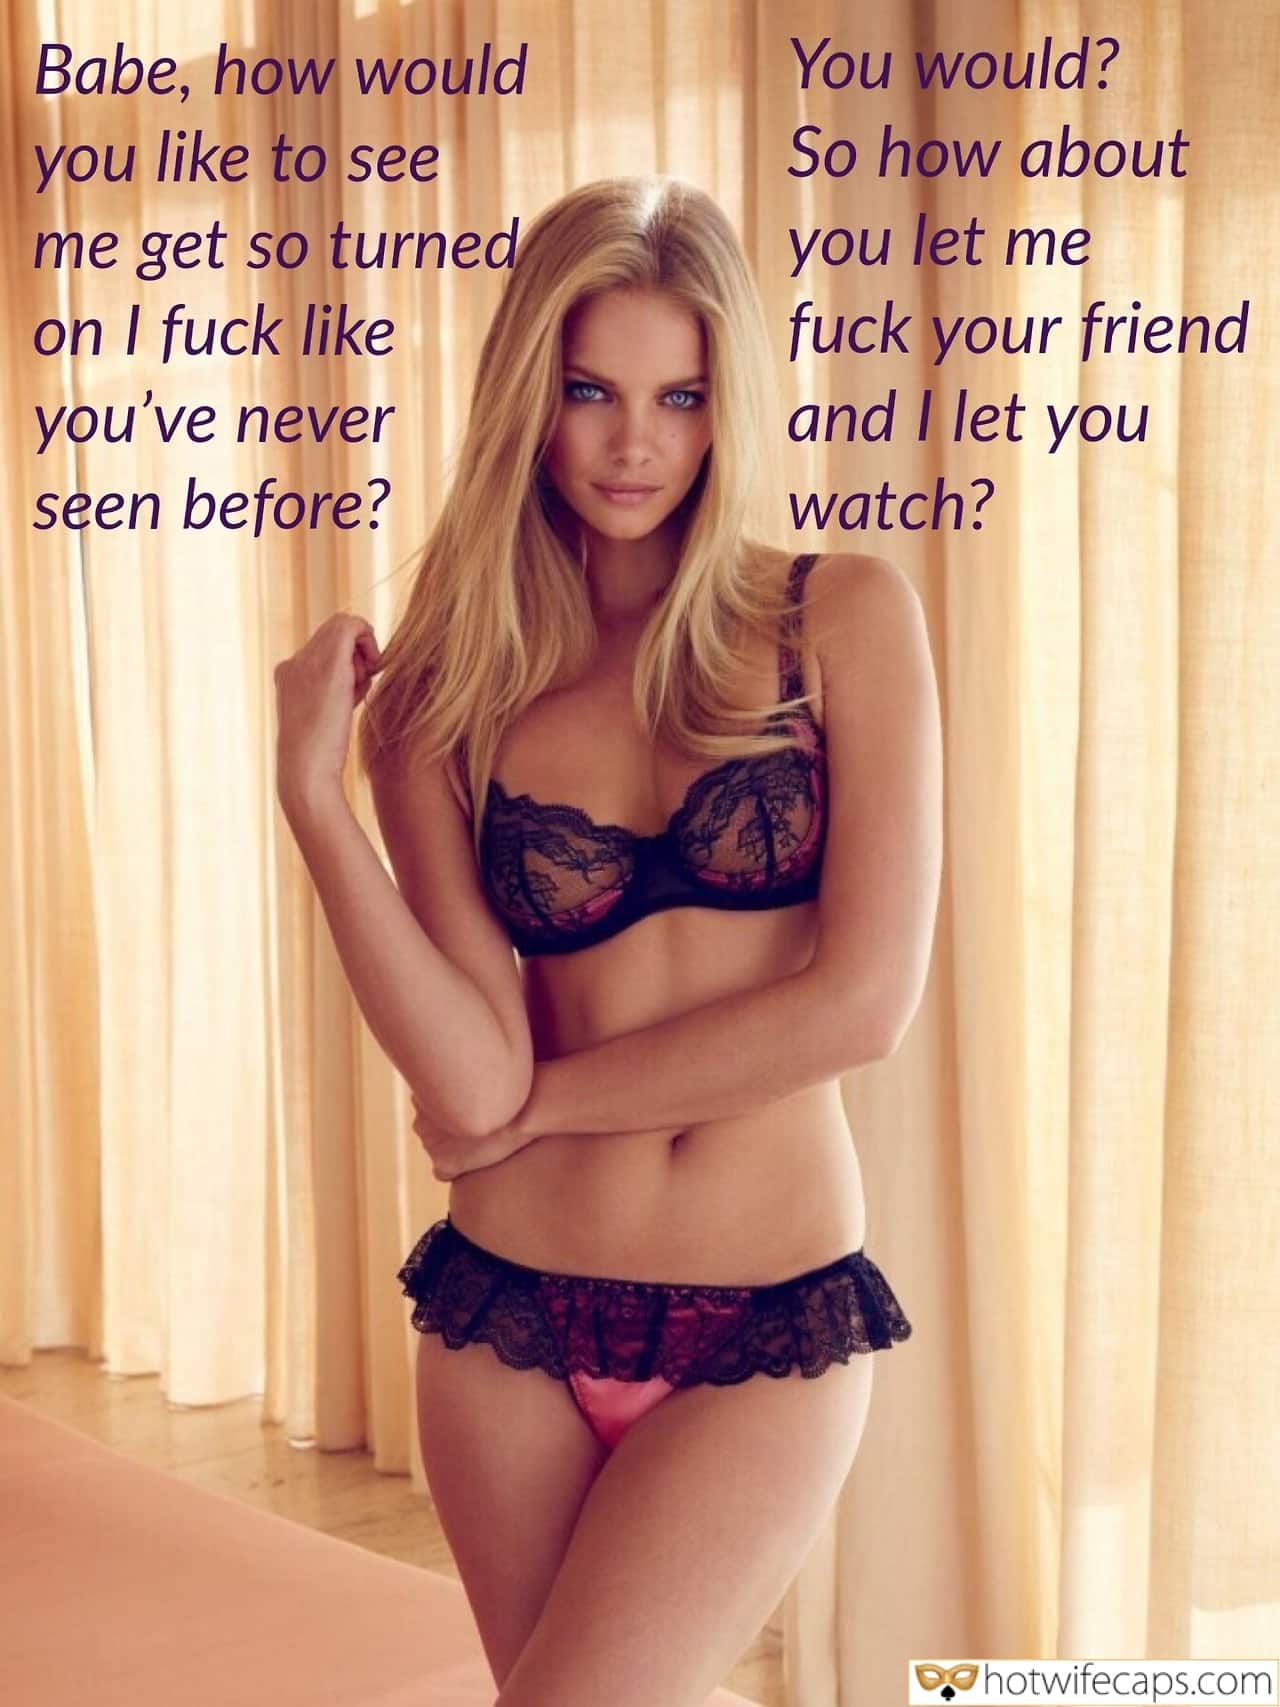 Boss, Bull, Bully, Cheating, Friends, Sexy Memes, Threesome Hotwife Caption №565894 hot blonde little wife image